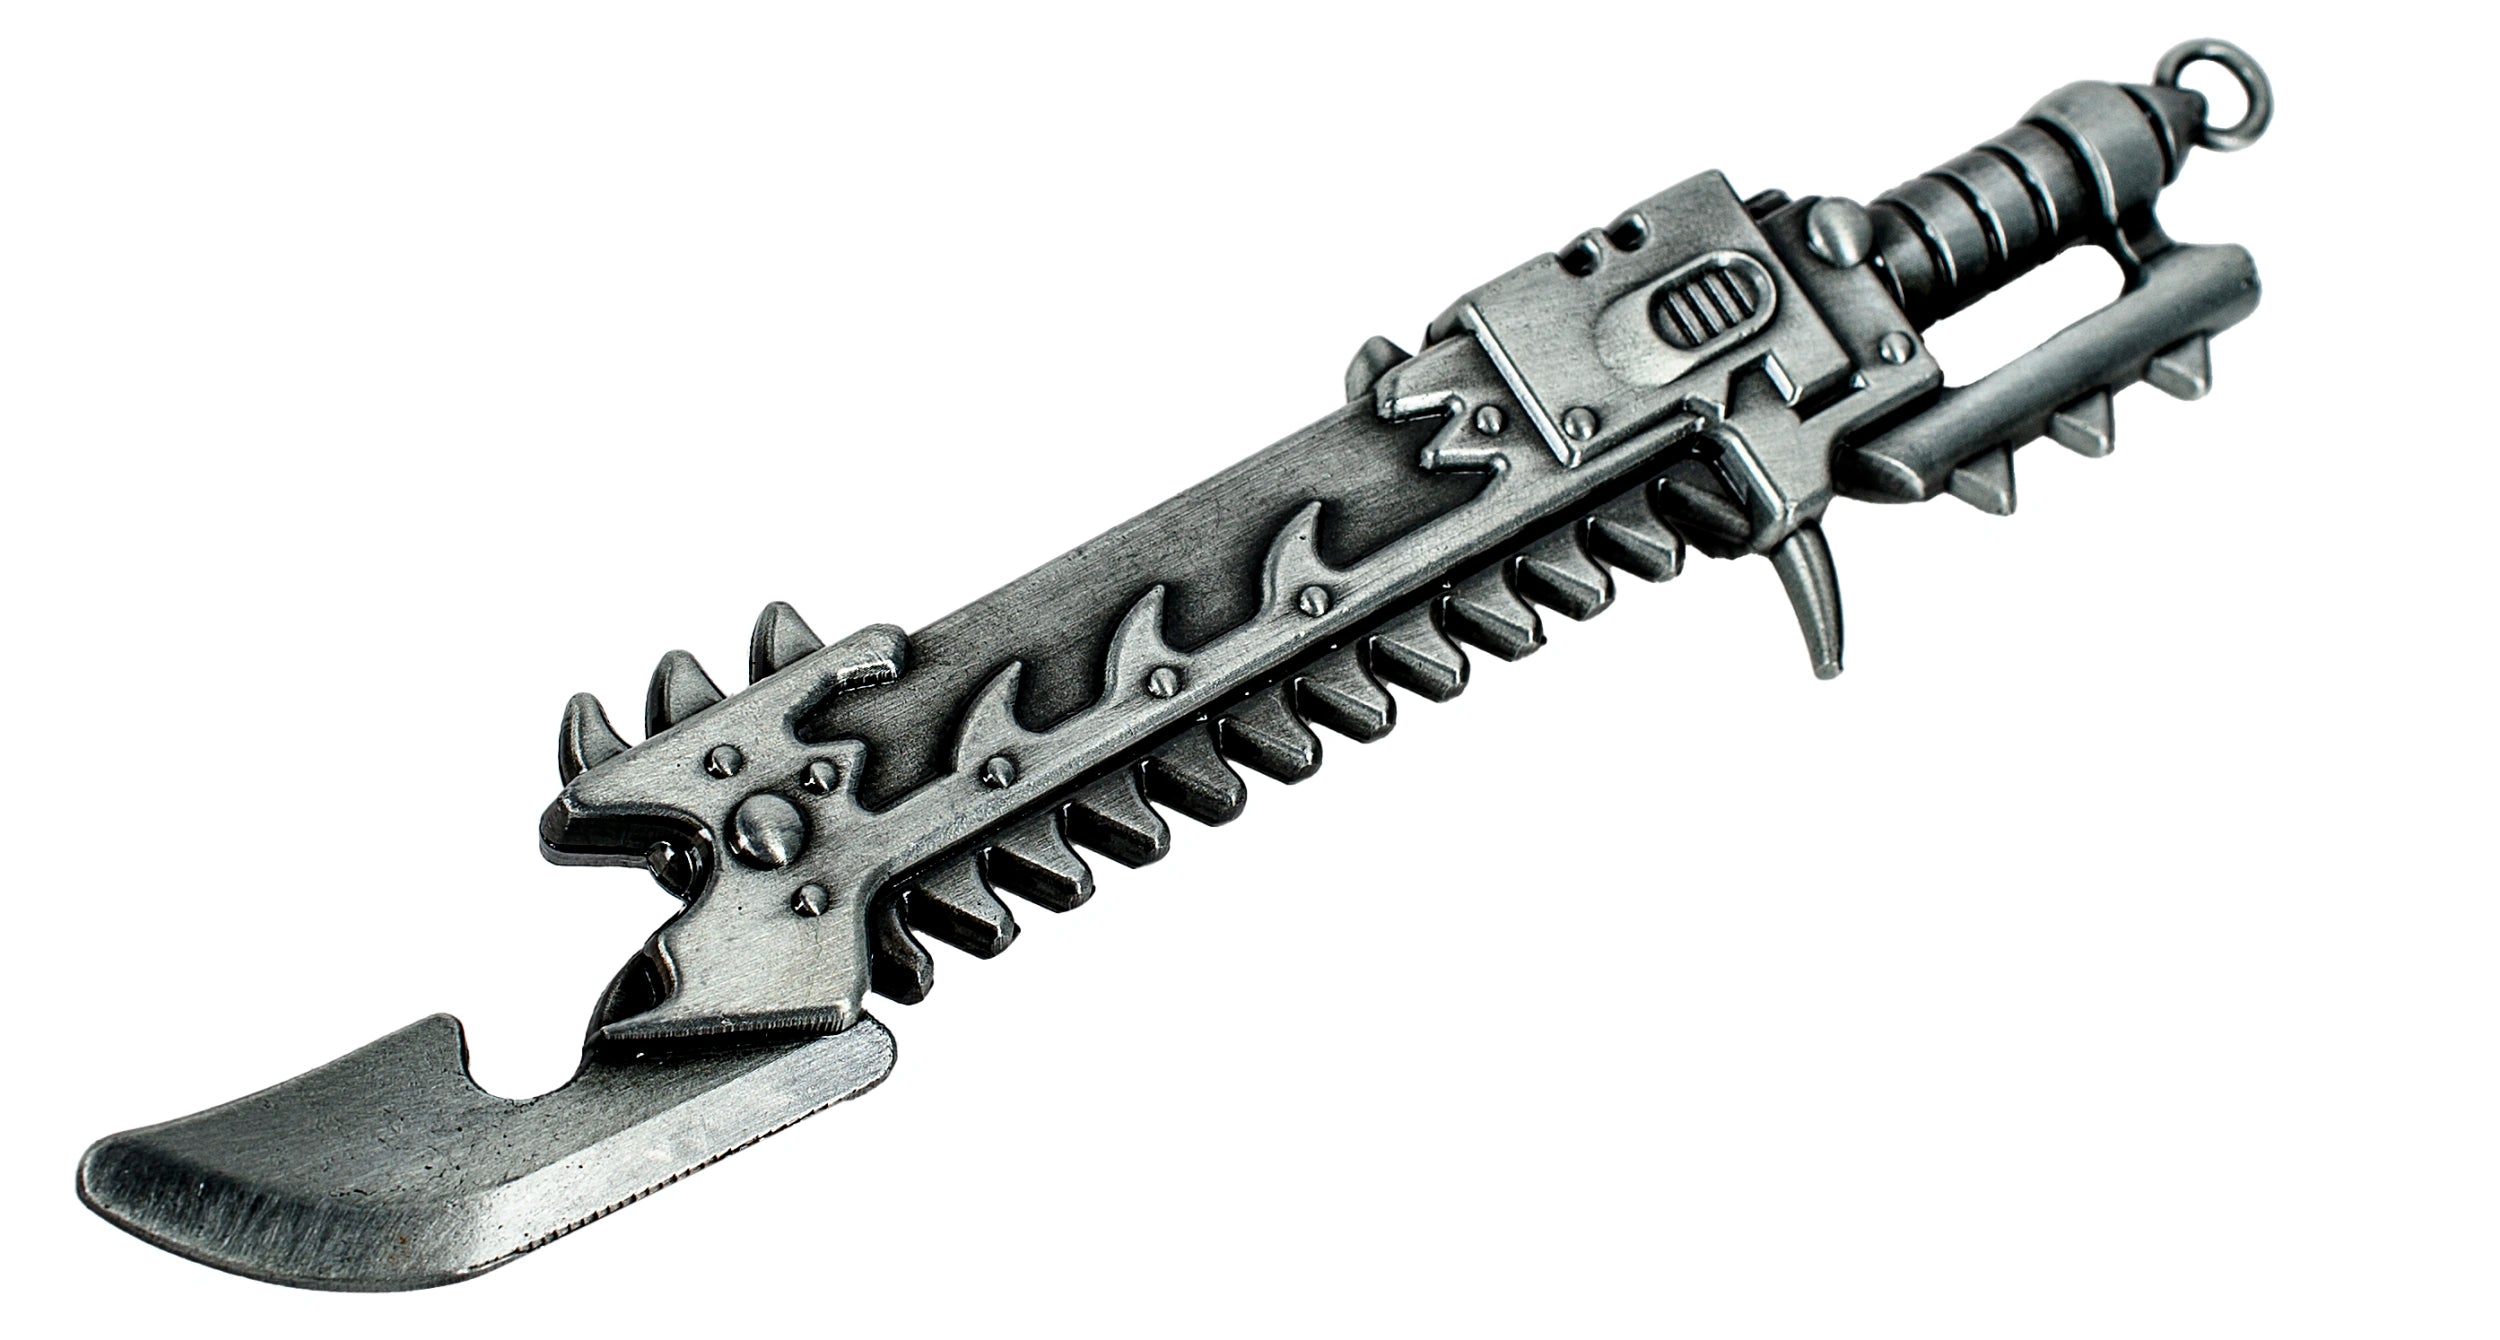 Warhammer 40,000: Chaos Chainsword Bottle Opener [PRE ORDER] - Loaded Dice